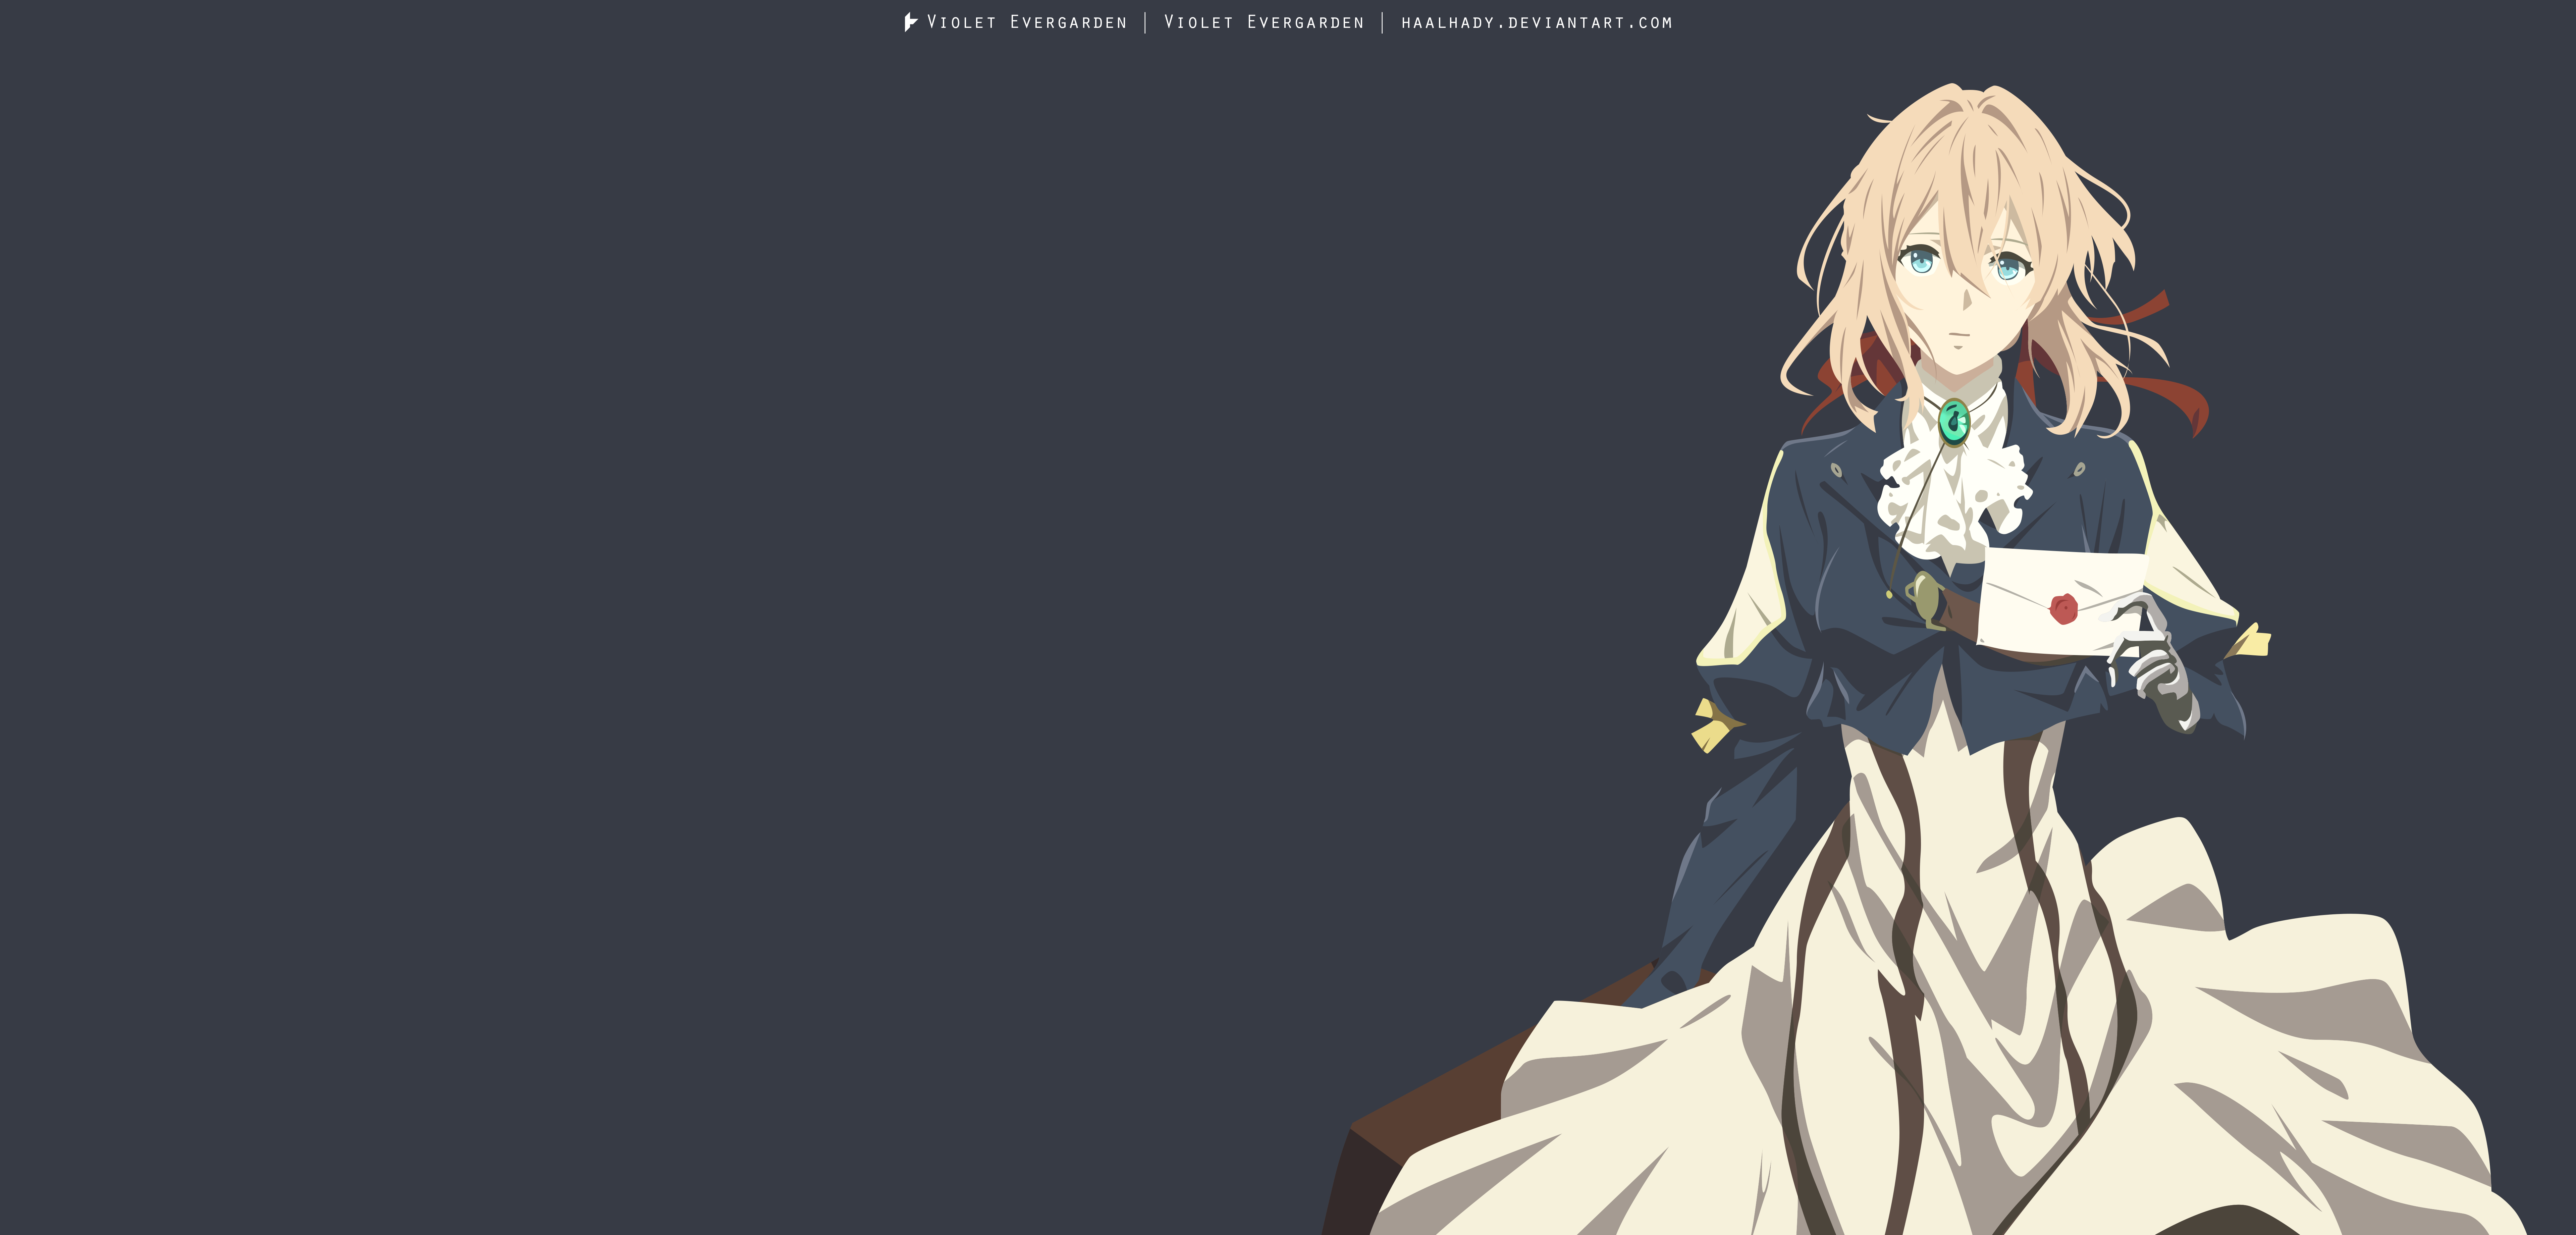 download free violet evergarden recollections